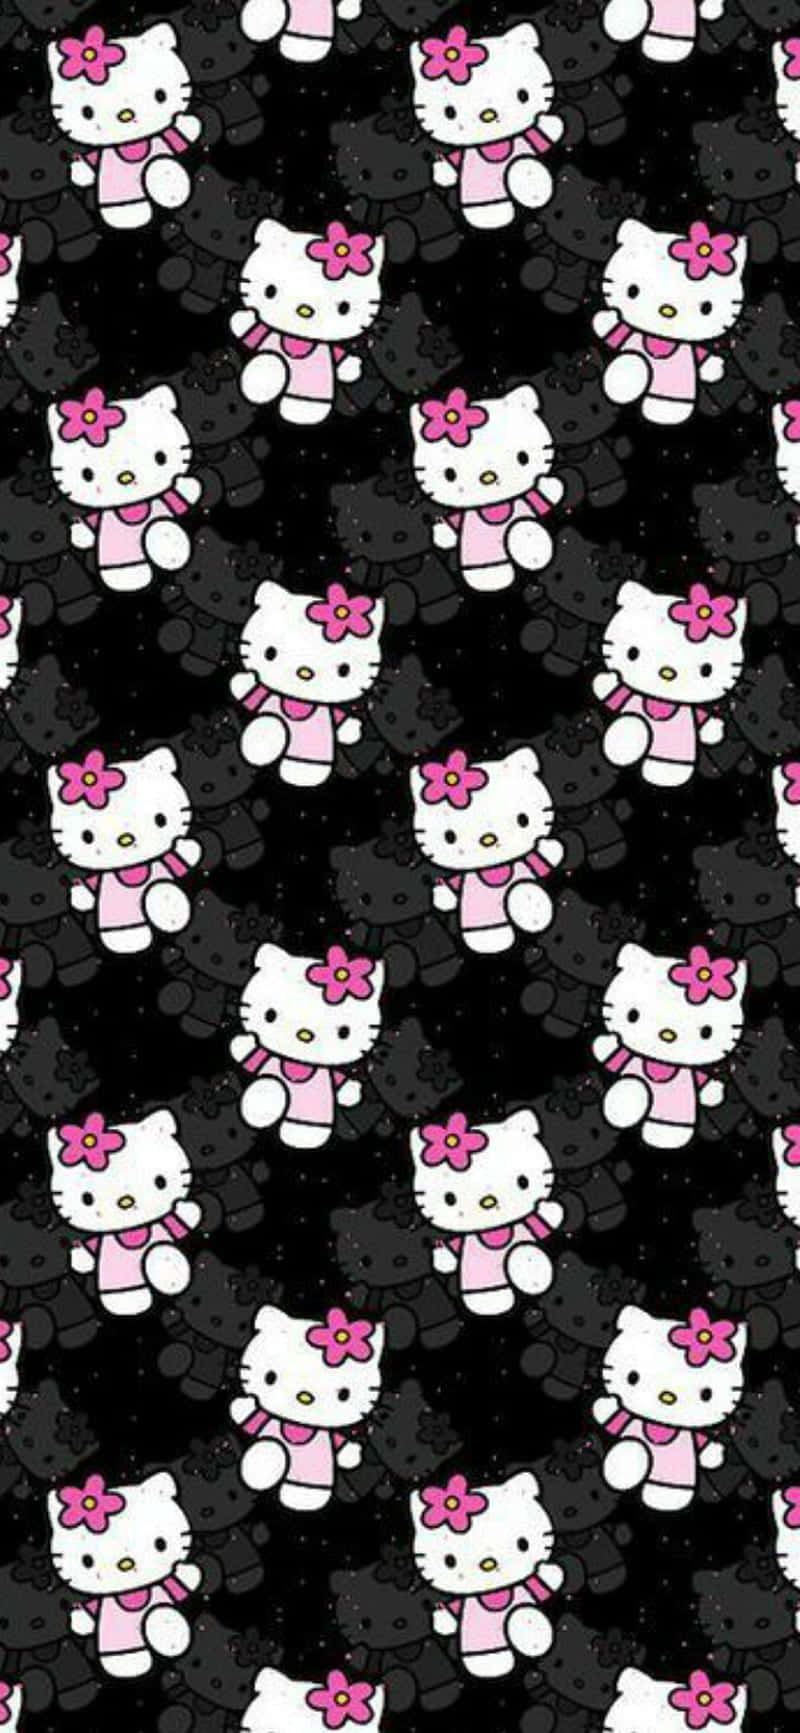 Express Your Emotional Side with Hello Kitty Wallpaper